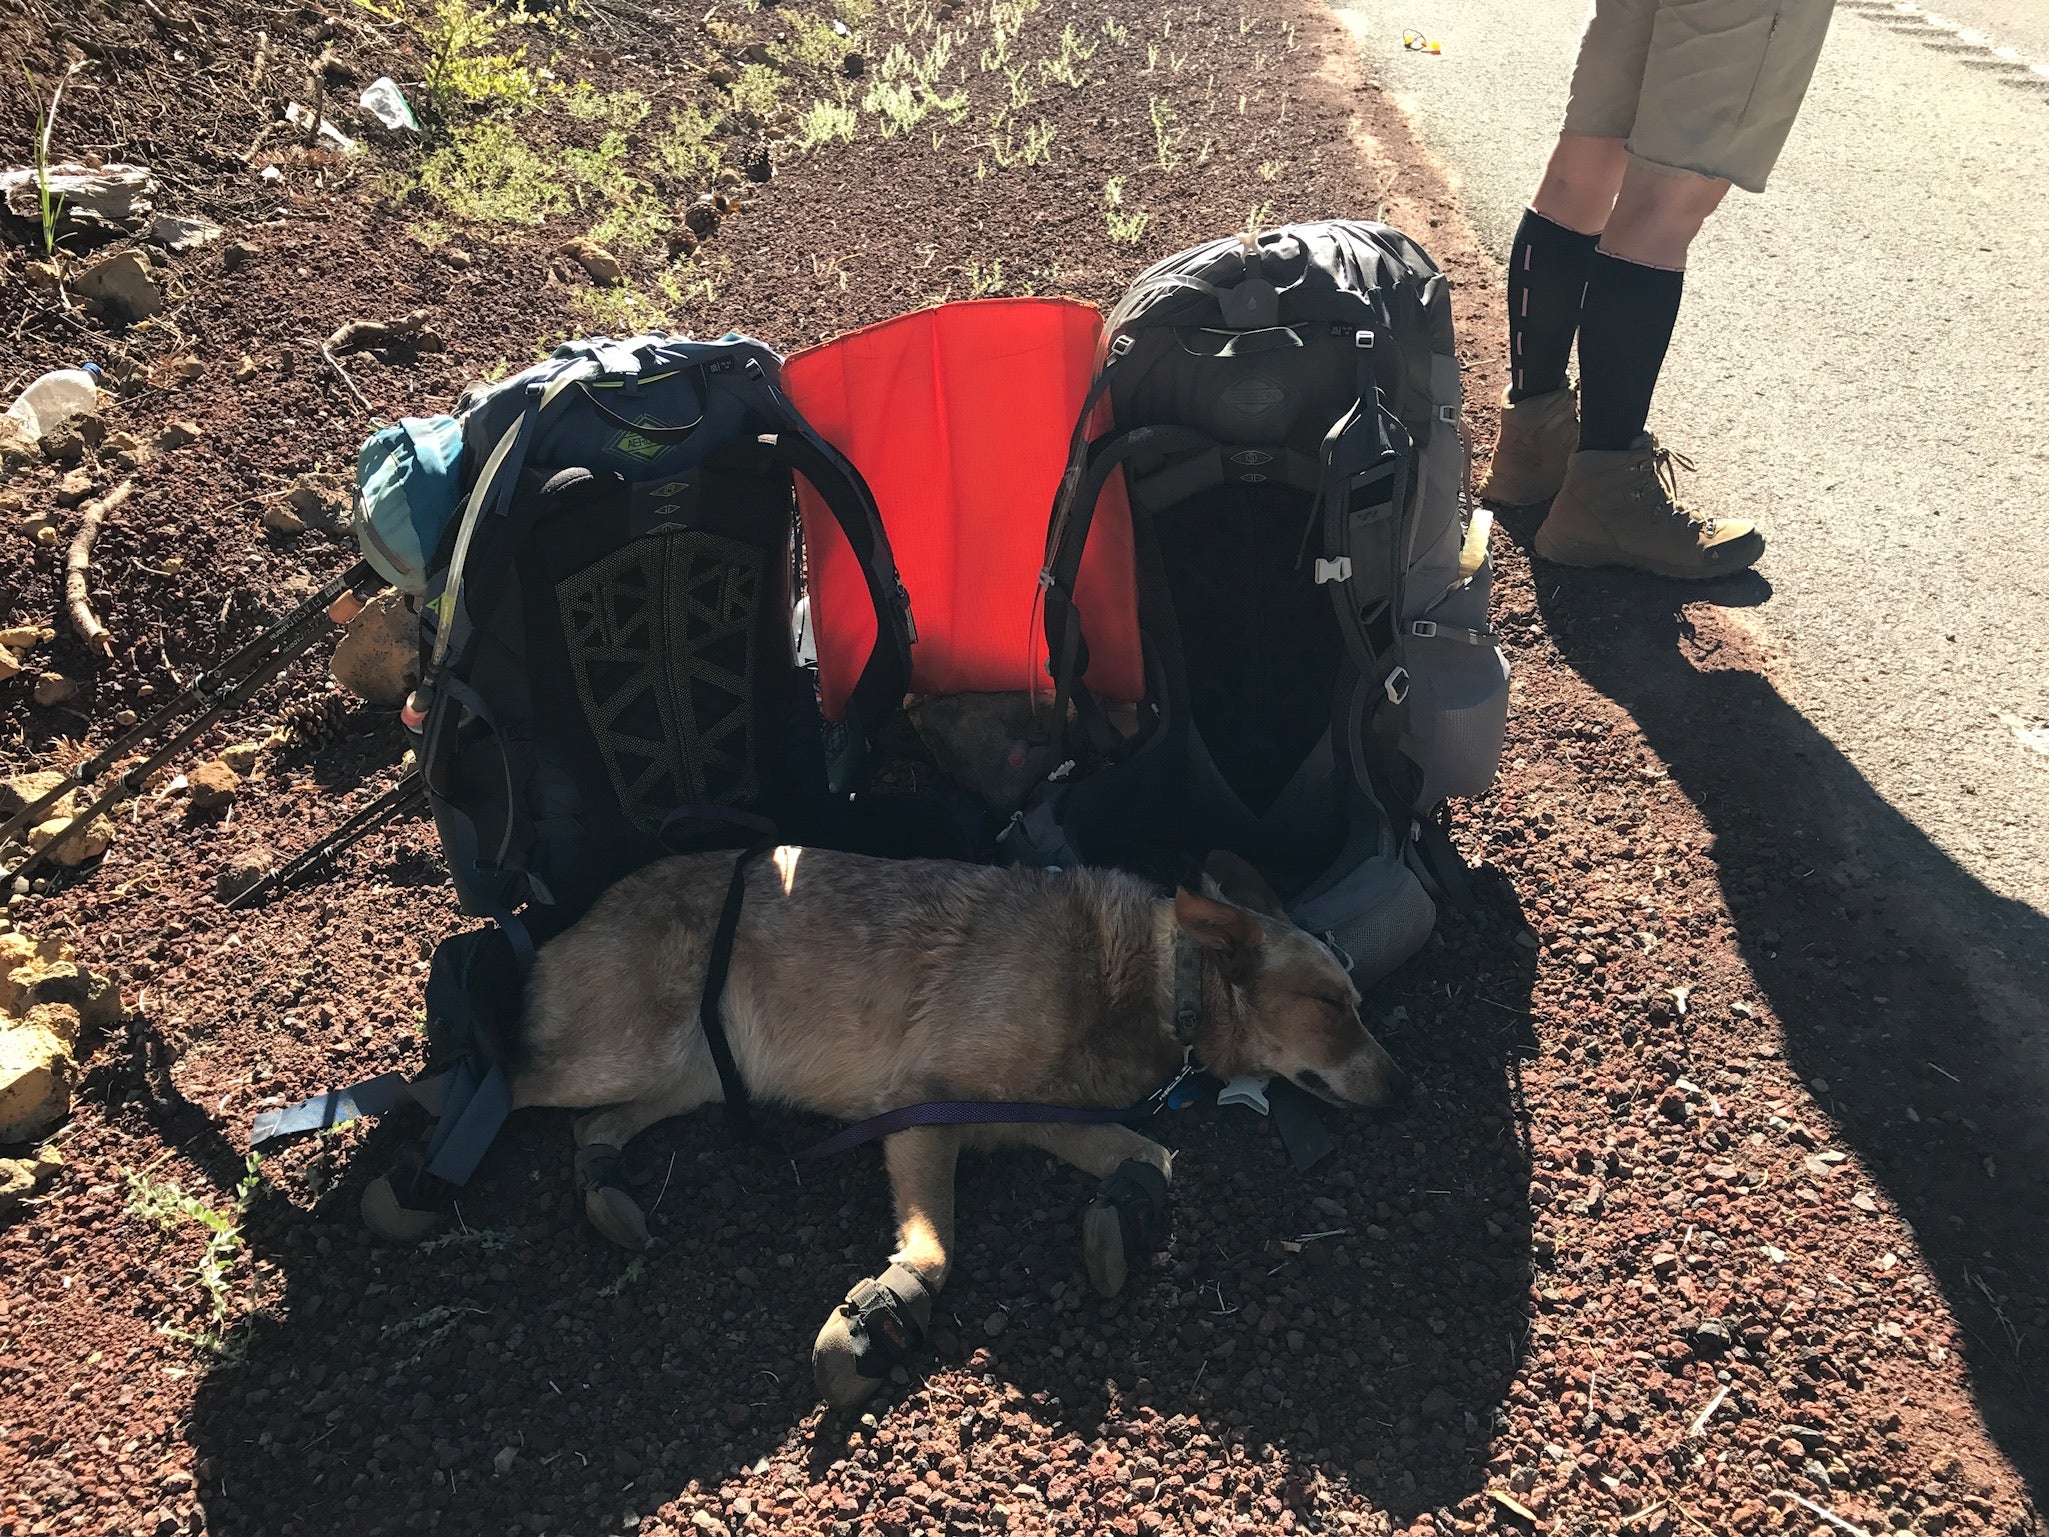 We used our packs to provide shade for the dog while we tried to get a ride to Fish Lake.  The packs have similar capacity (55 vs. 58 liters) so size was similar when standing.